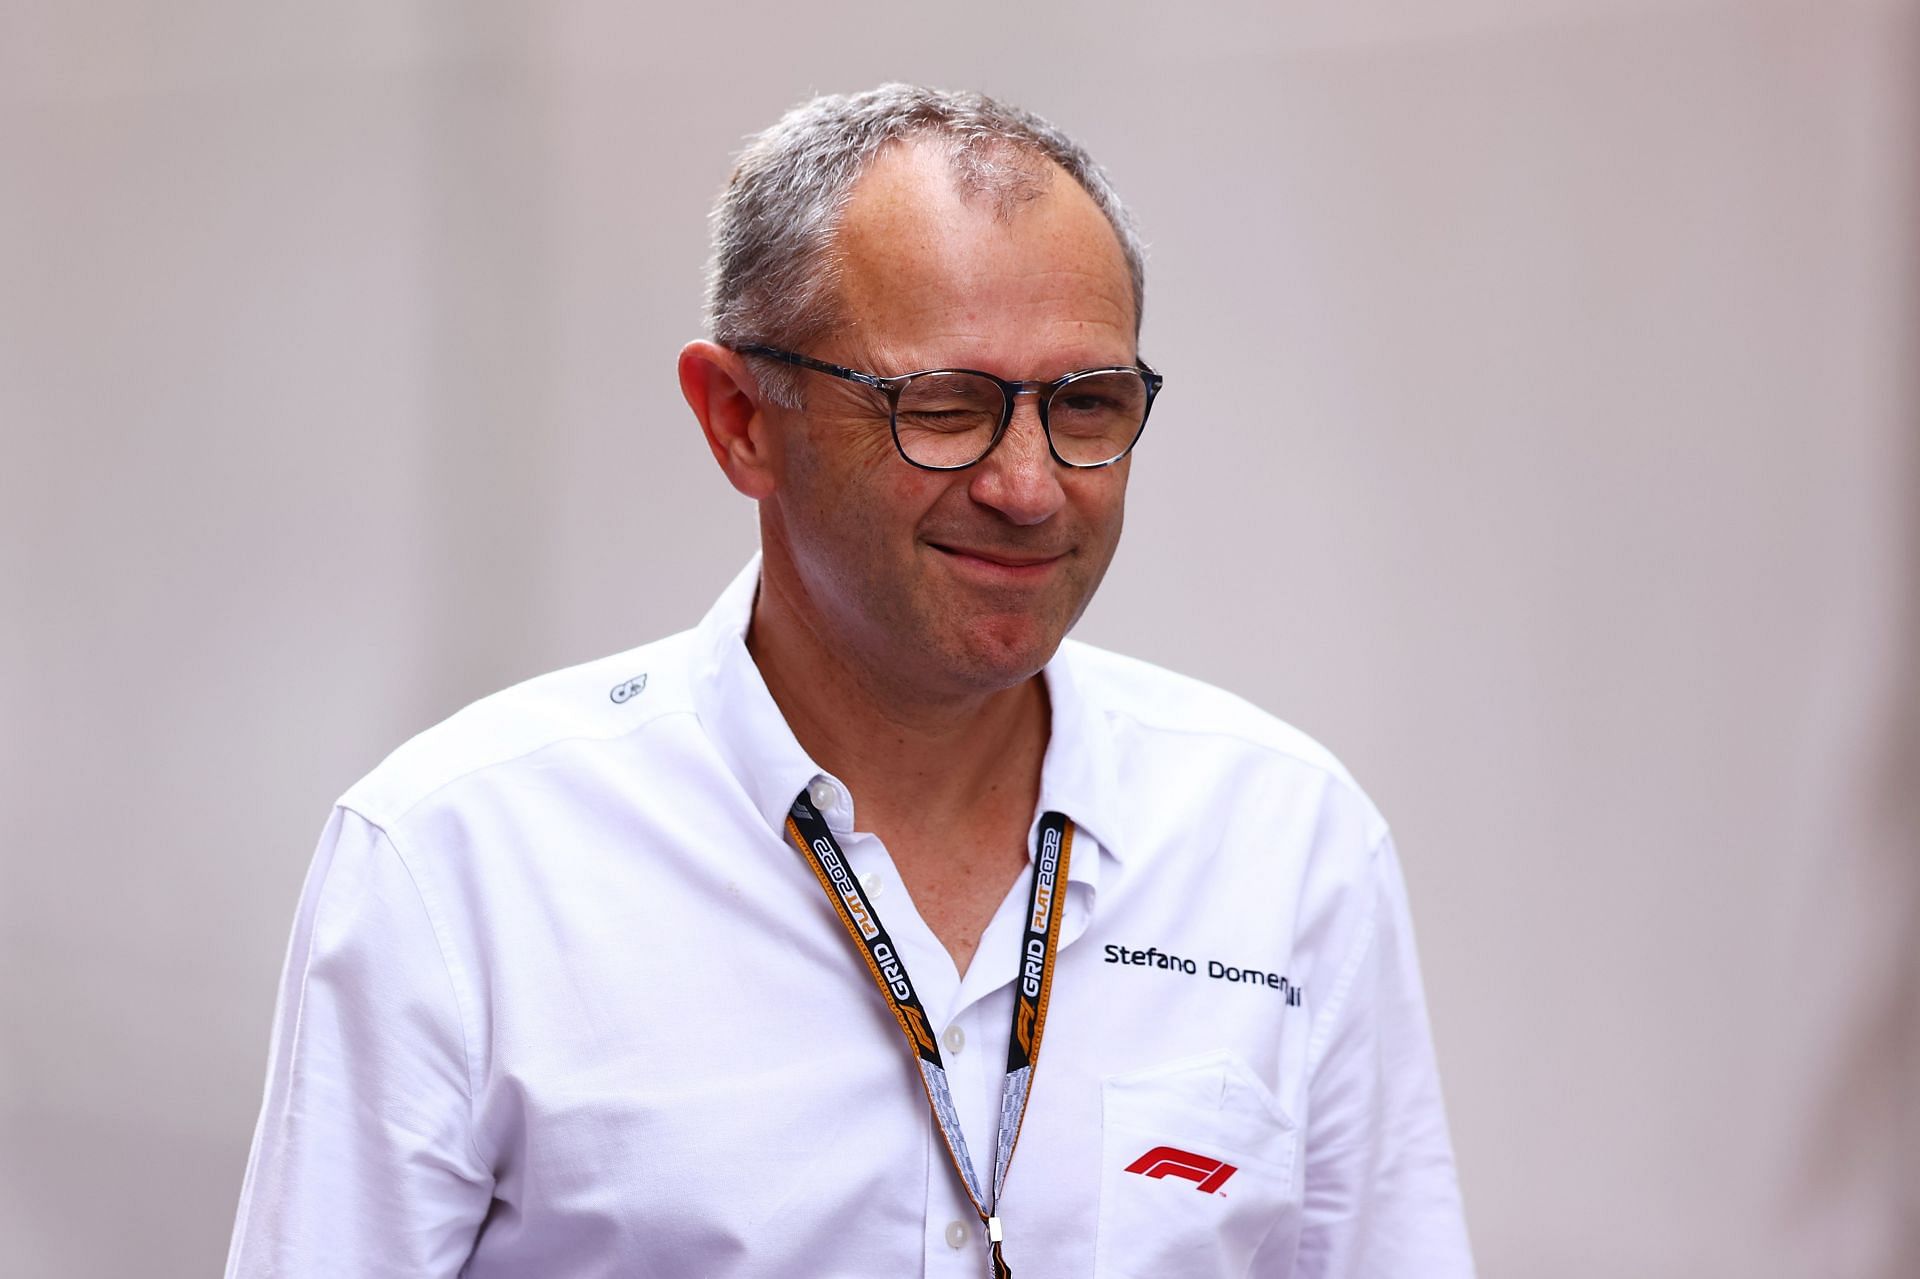 Stefano Domenicali feels that the sport could be looking at as many as 24 races next season